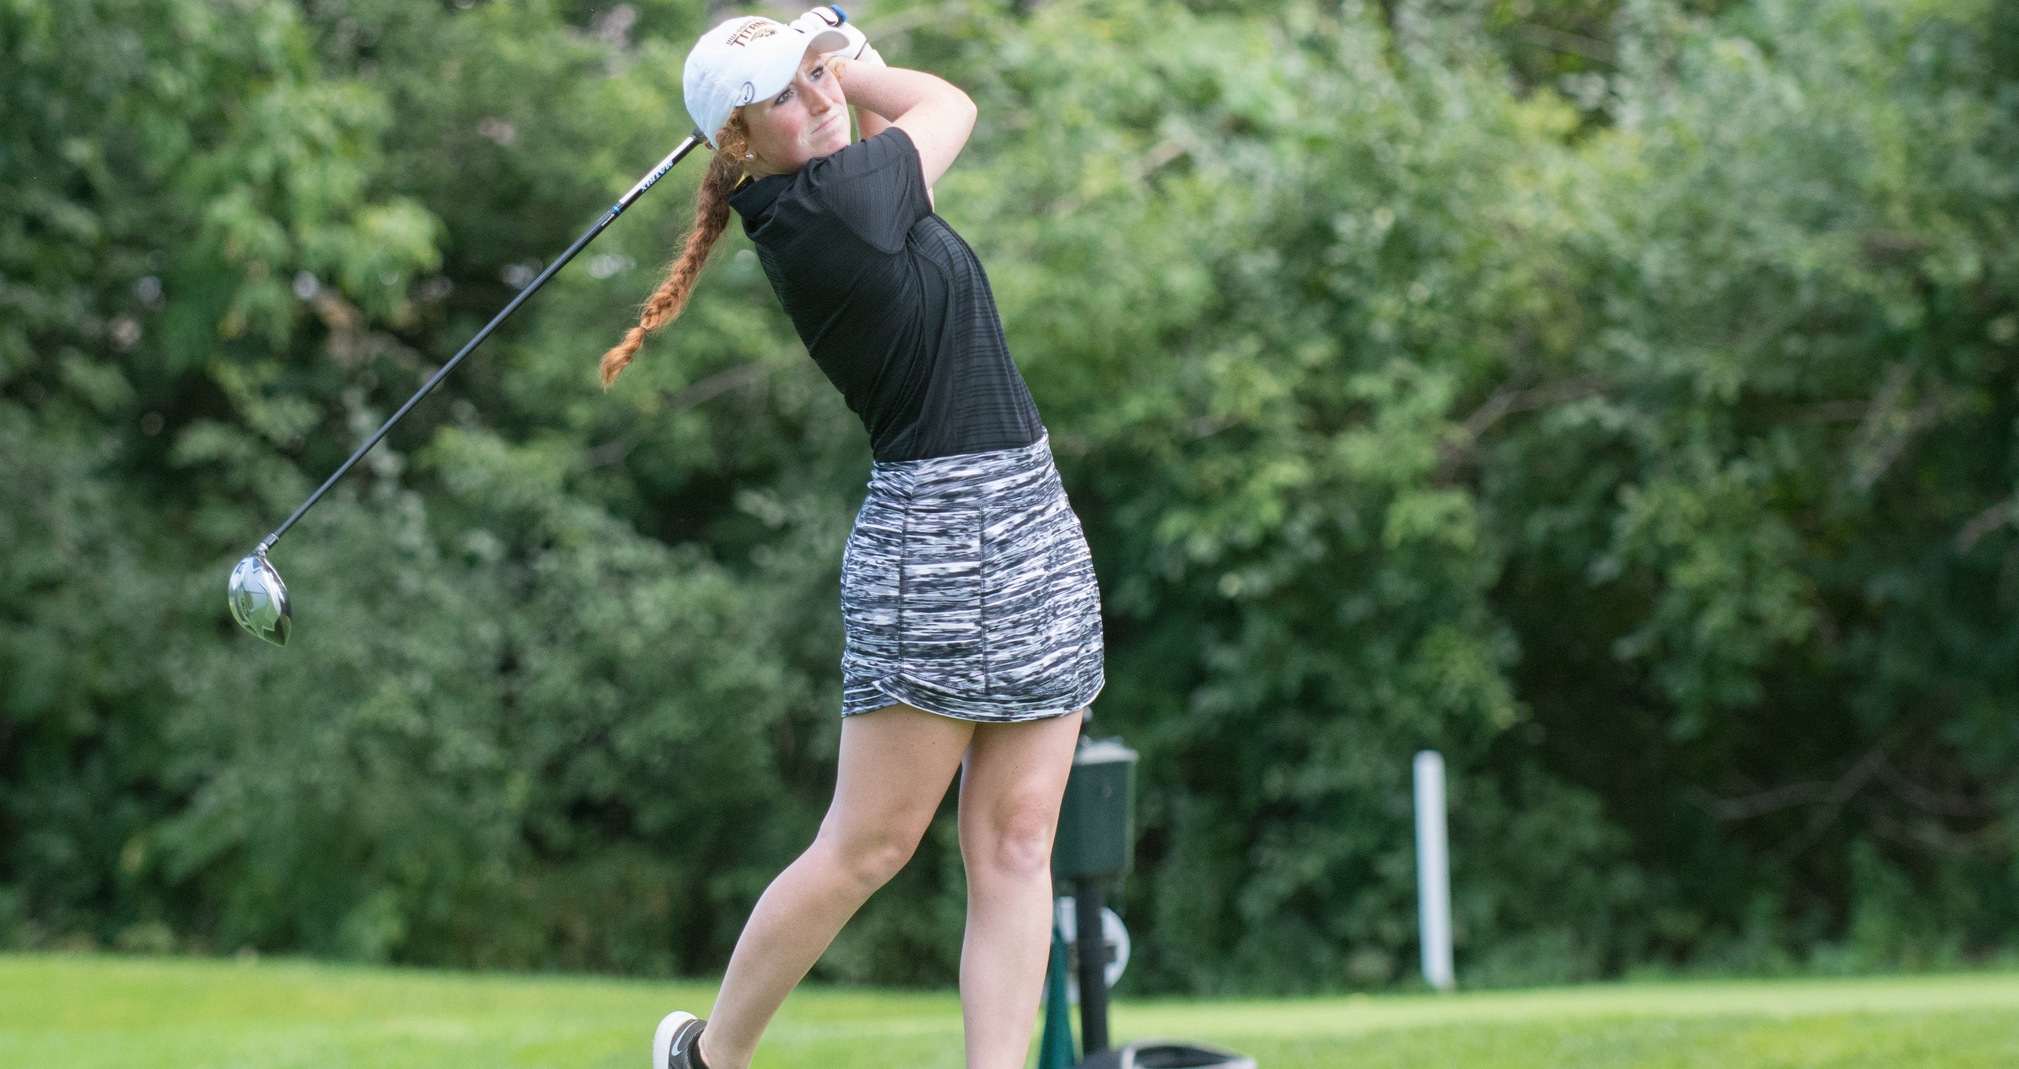 Micayla Richards accumulated 162 strokes (18-over-par) to finish 32nd among the 111 golfers.